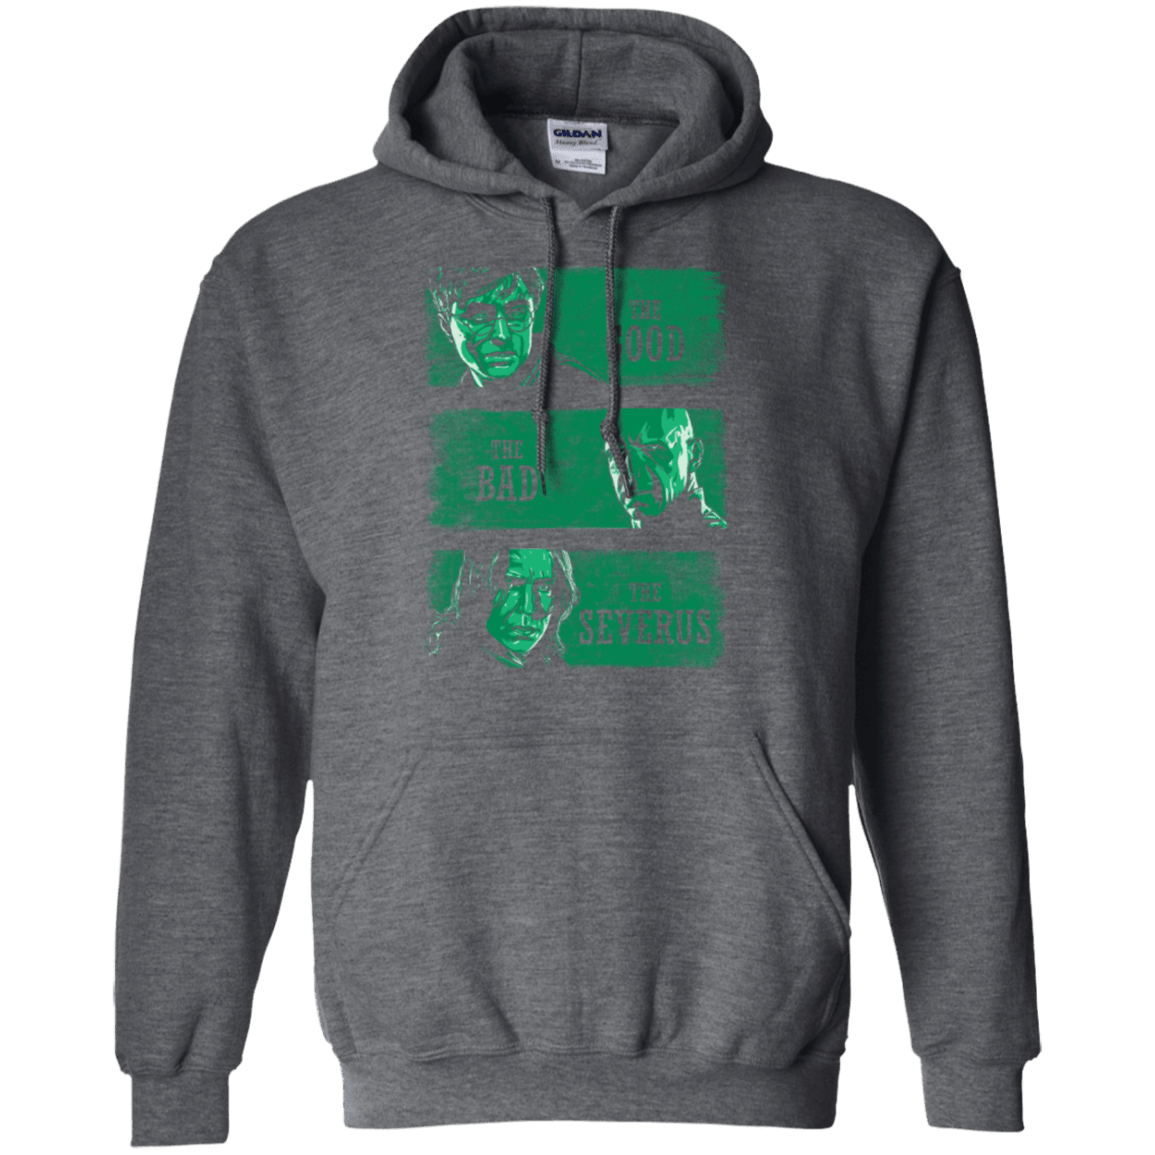 Sweatshirts Dark Heather / Small The Good the Bad and the Severus Pullover Hoodie